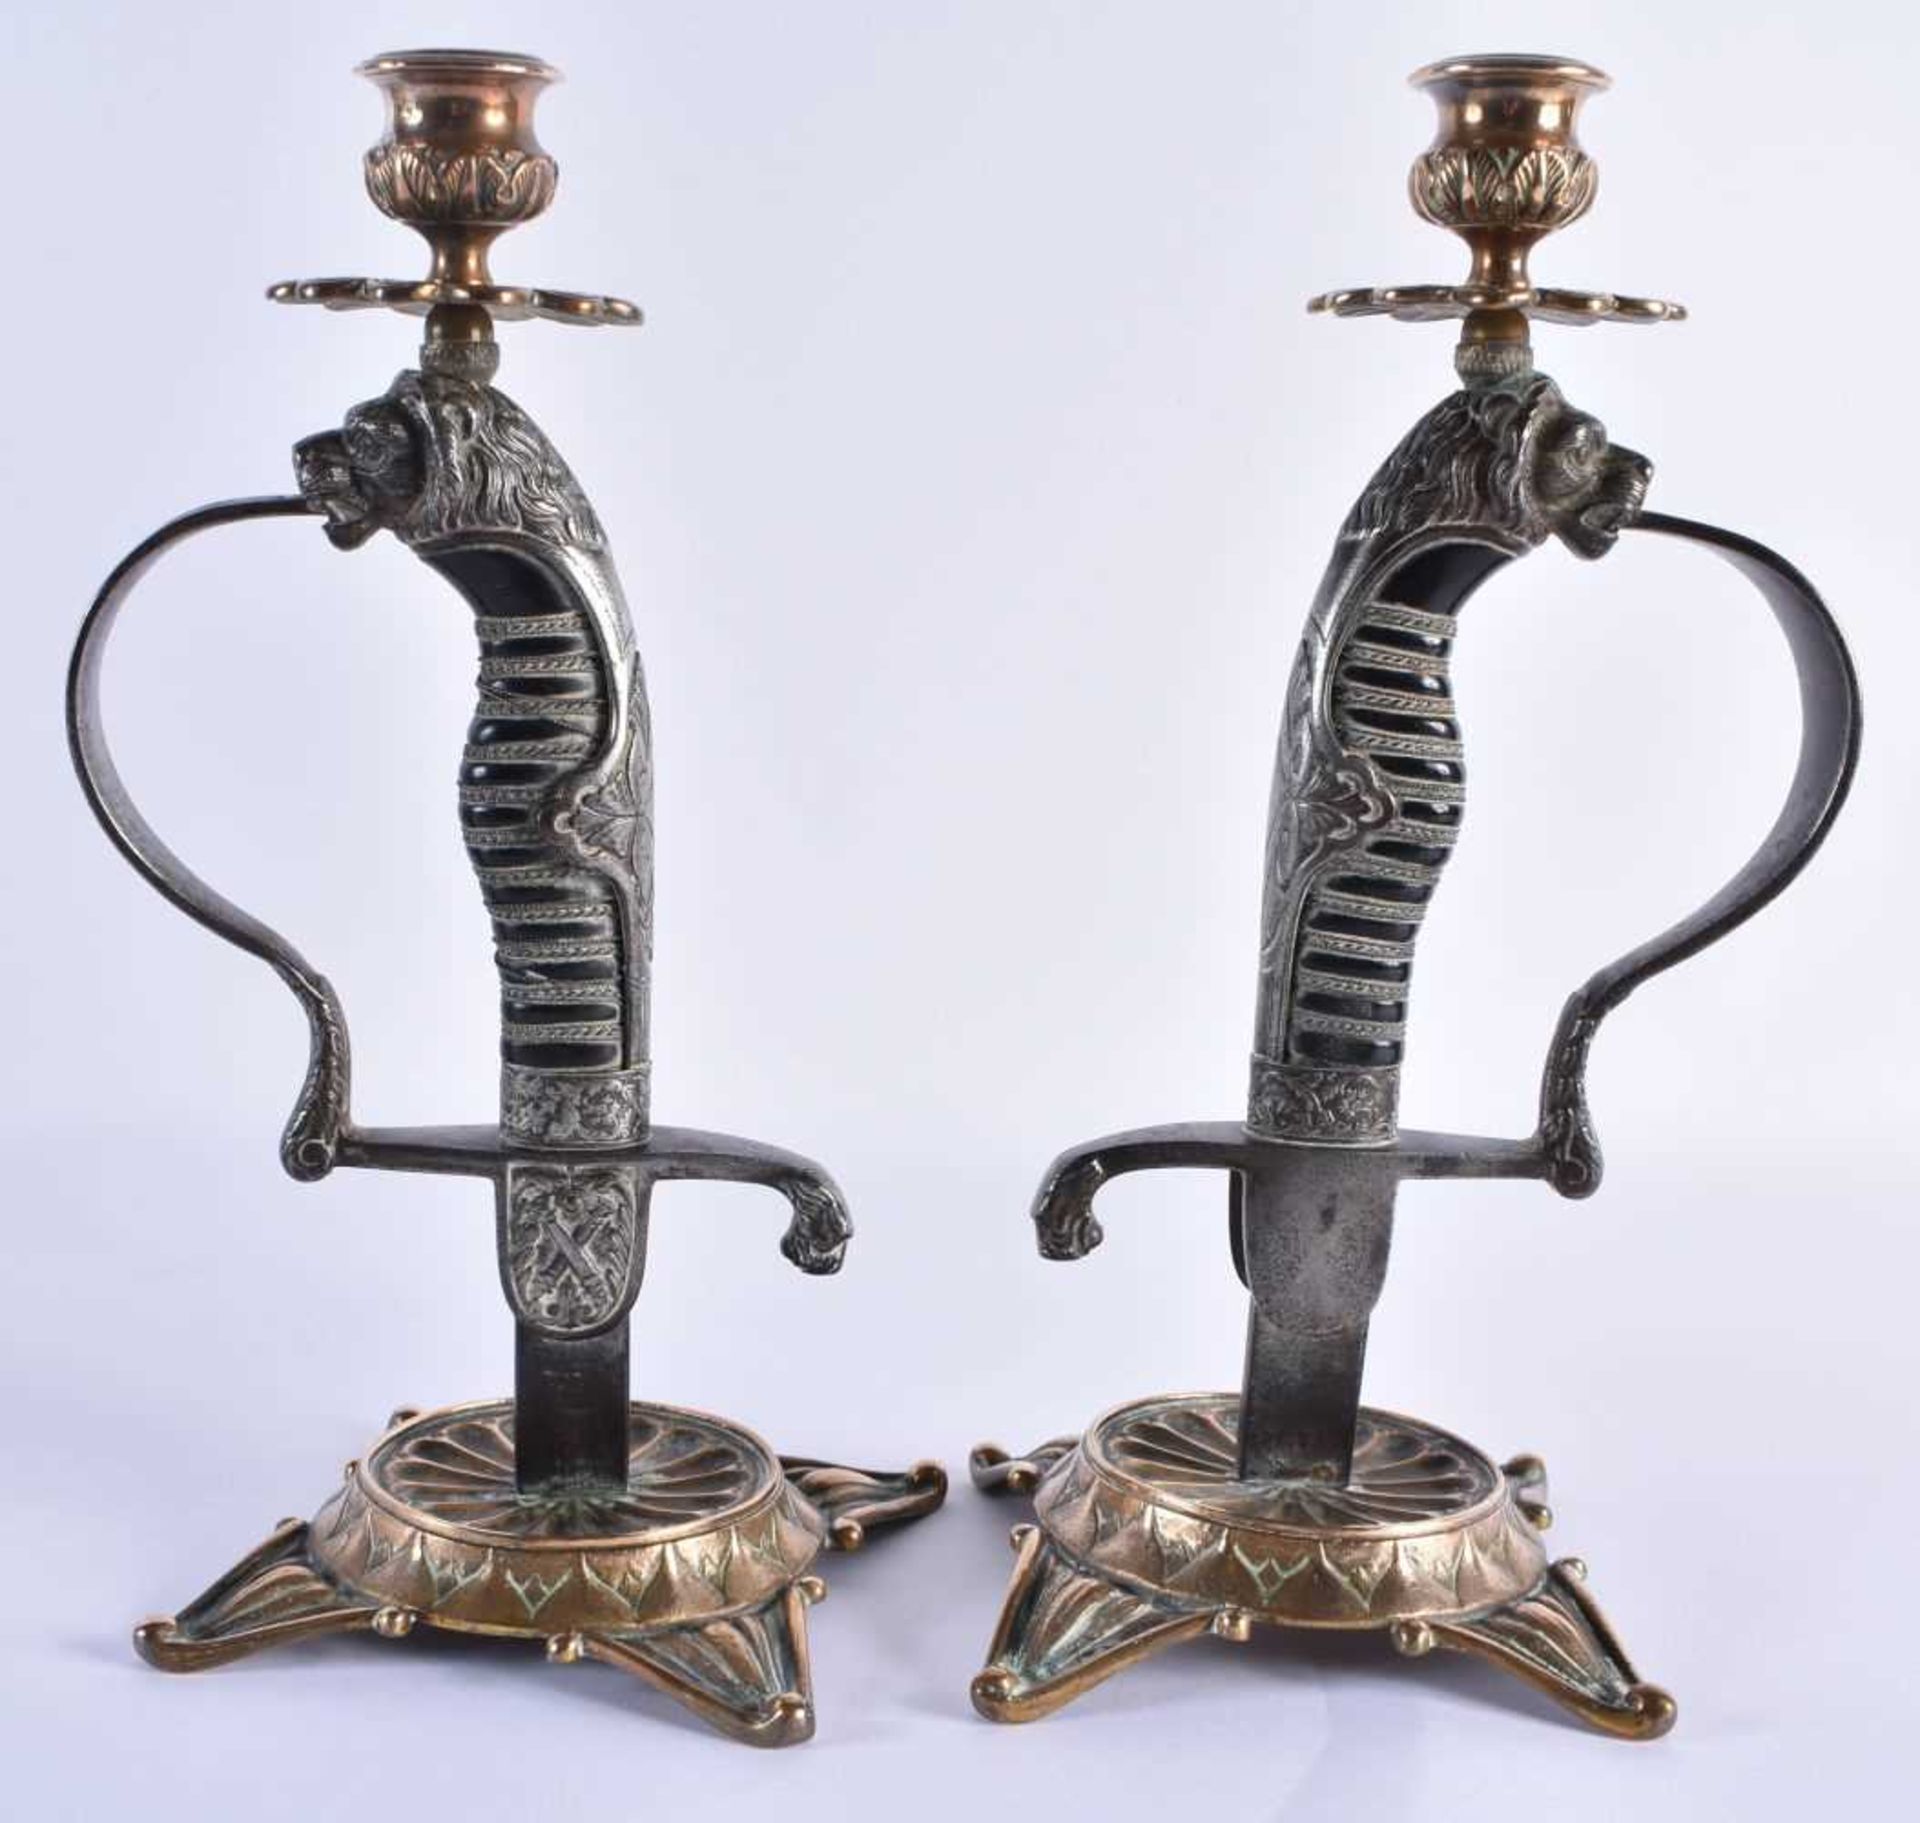 A LOVELY PAIR OF 19TH CENTURY ENGLISH COUNTRY HOUSE MILITARY INTEREST CANDLESTICKS formed as steel